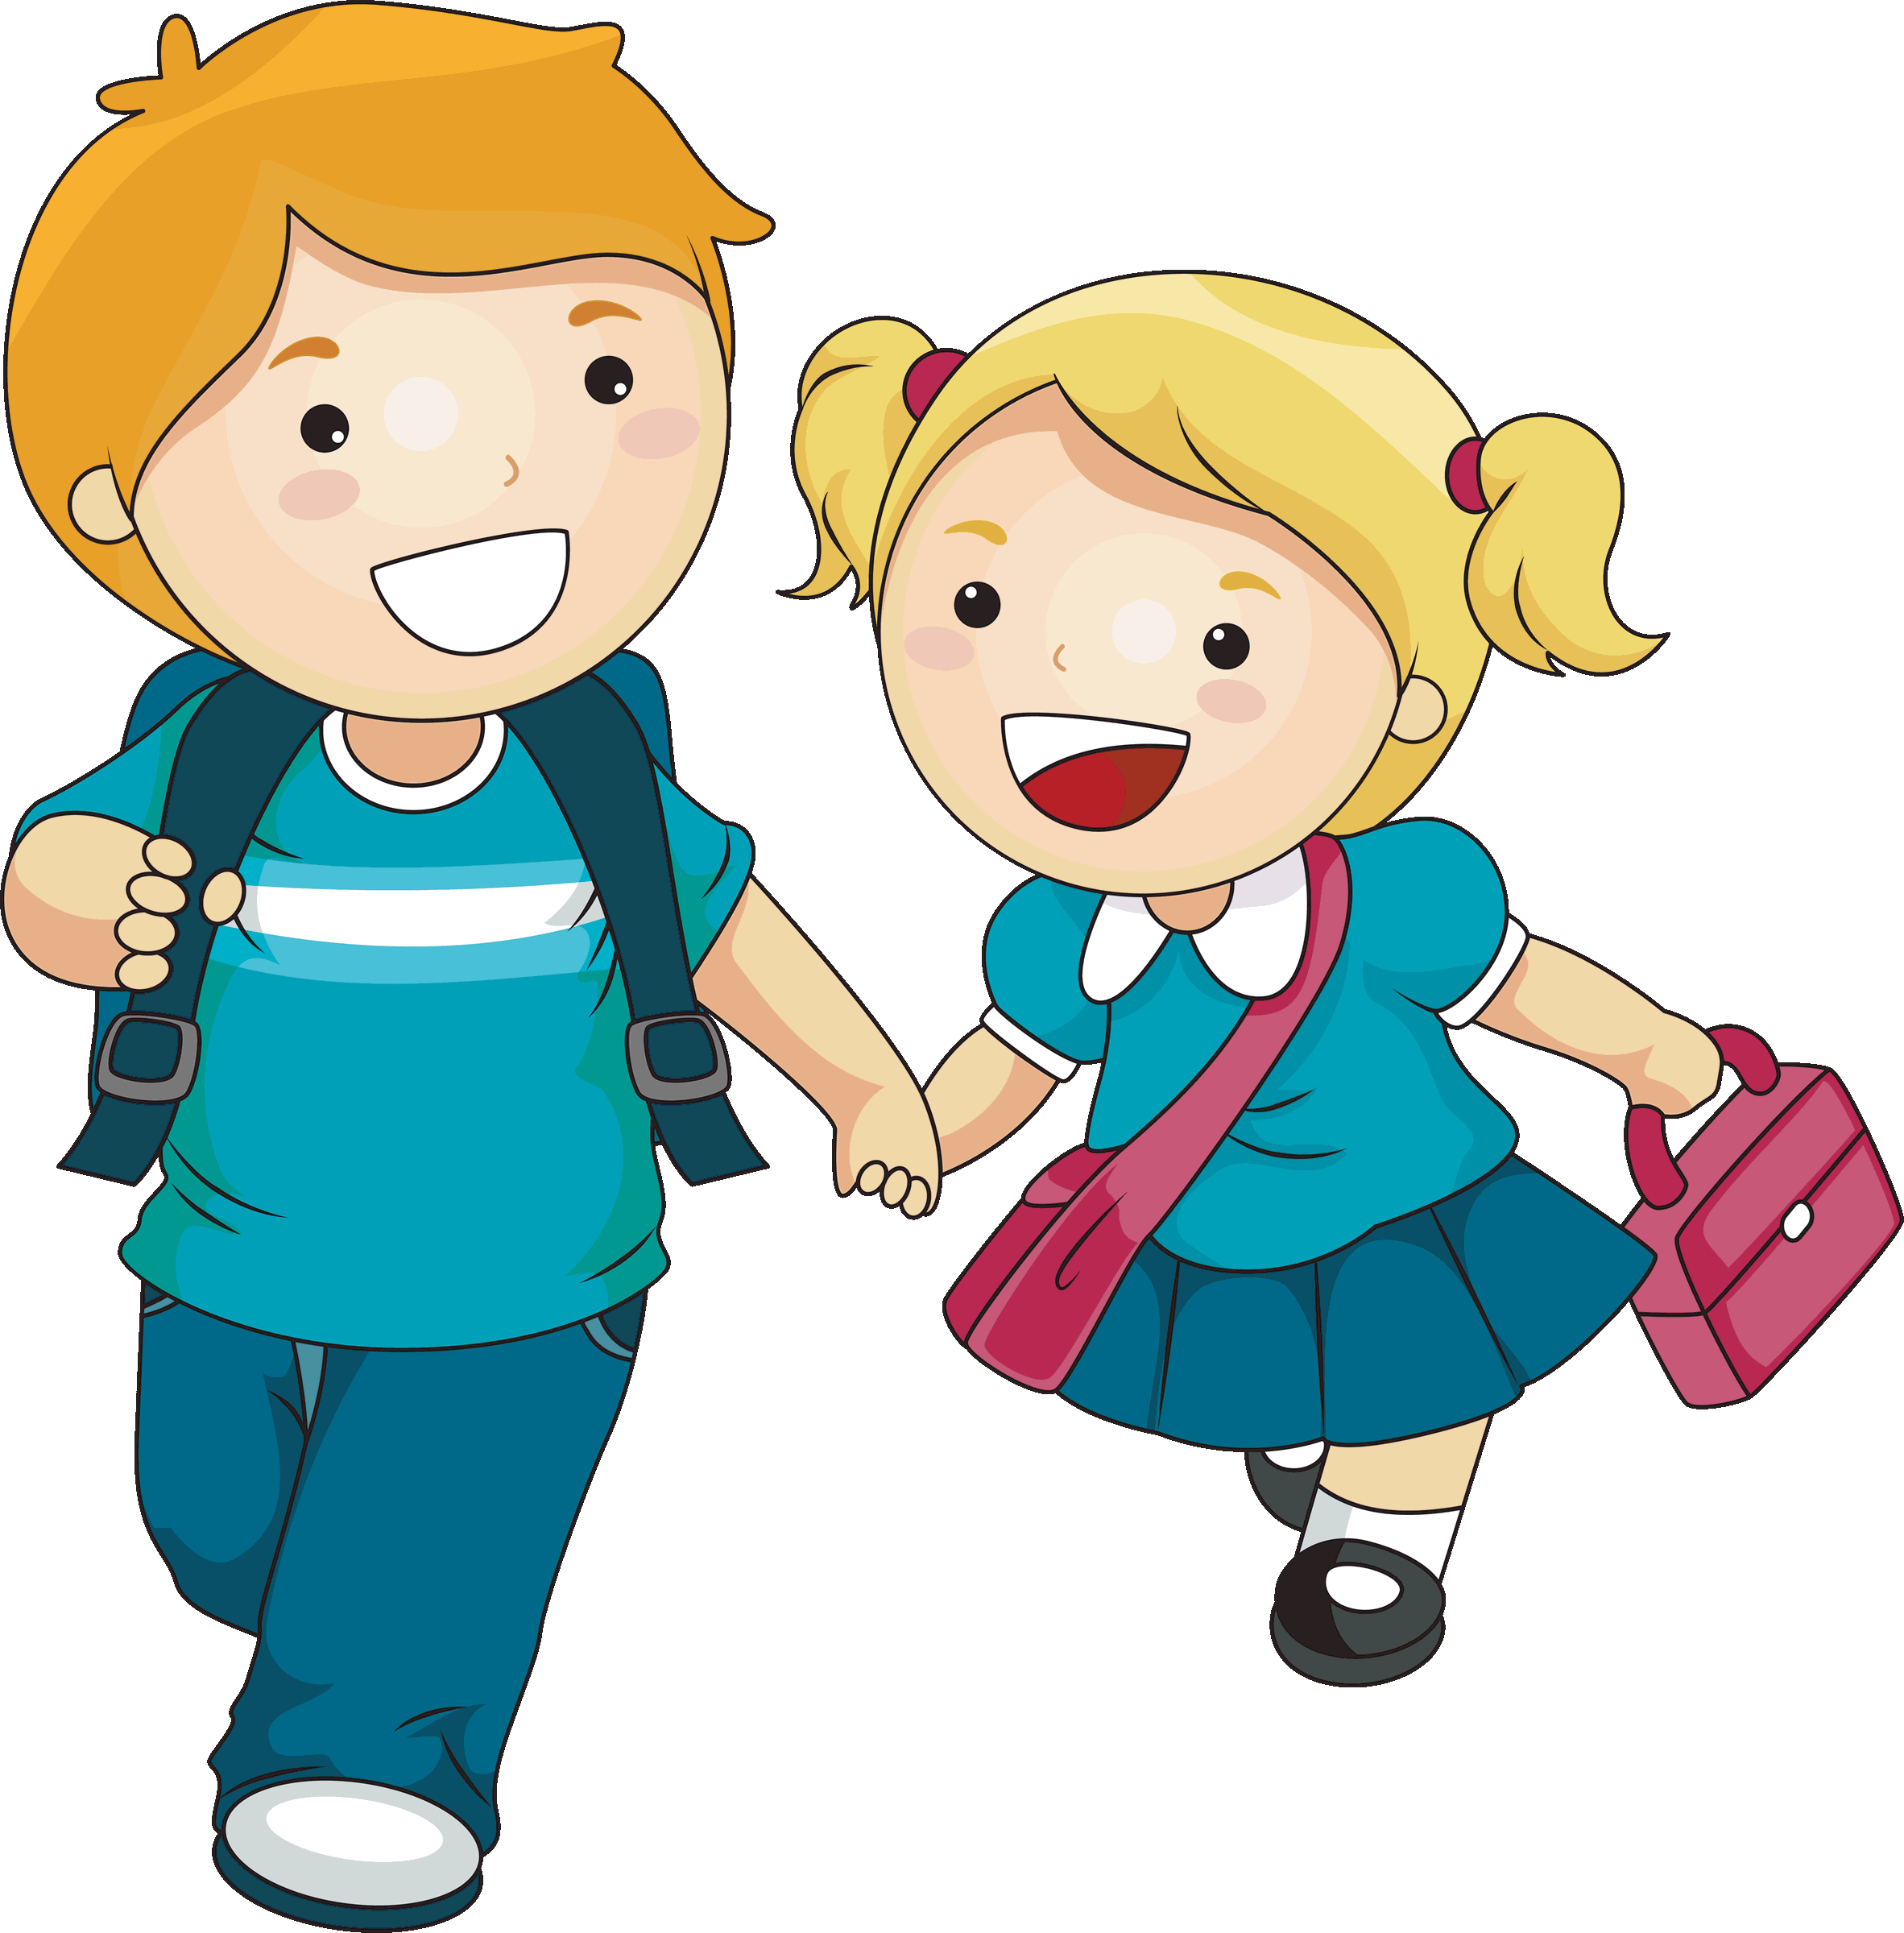 childrens clipart collection full download - photo #29